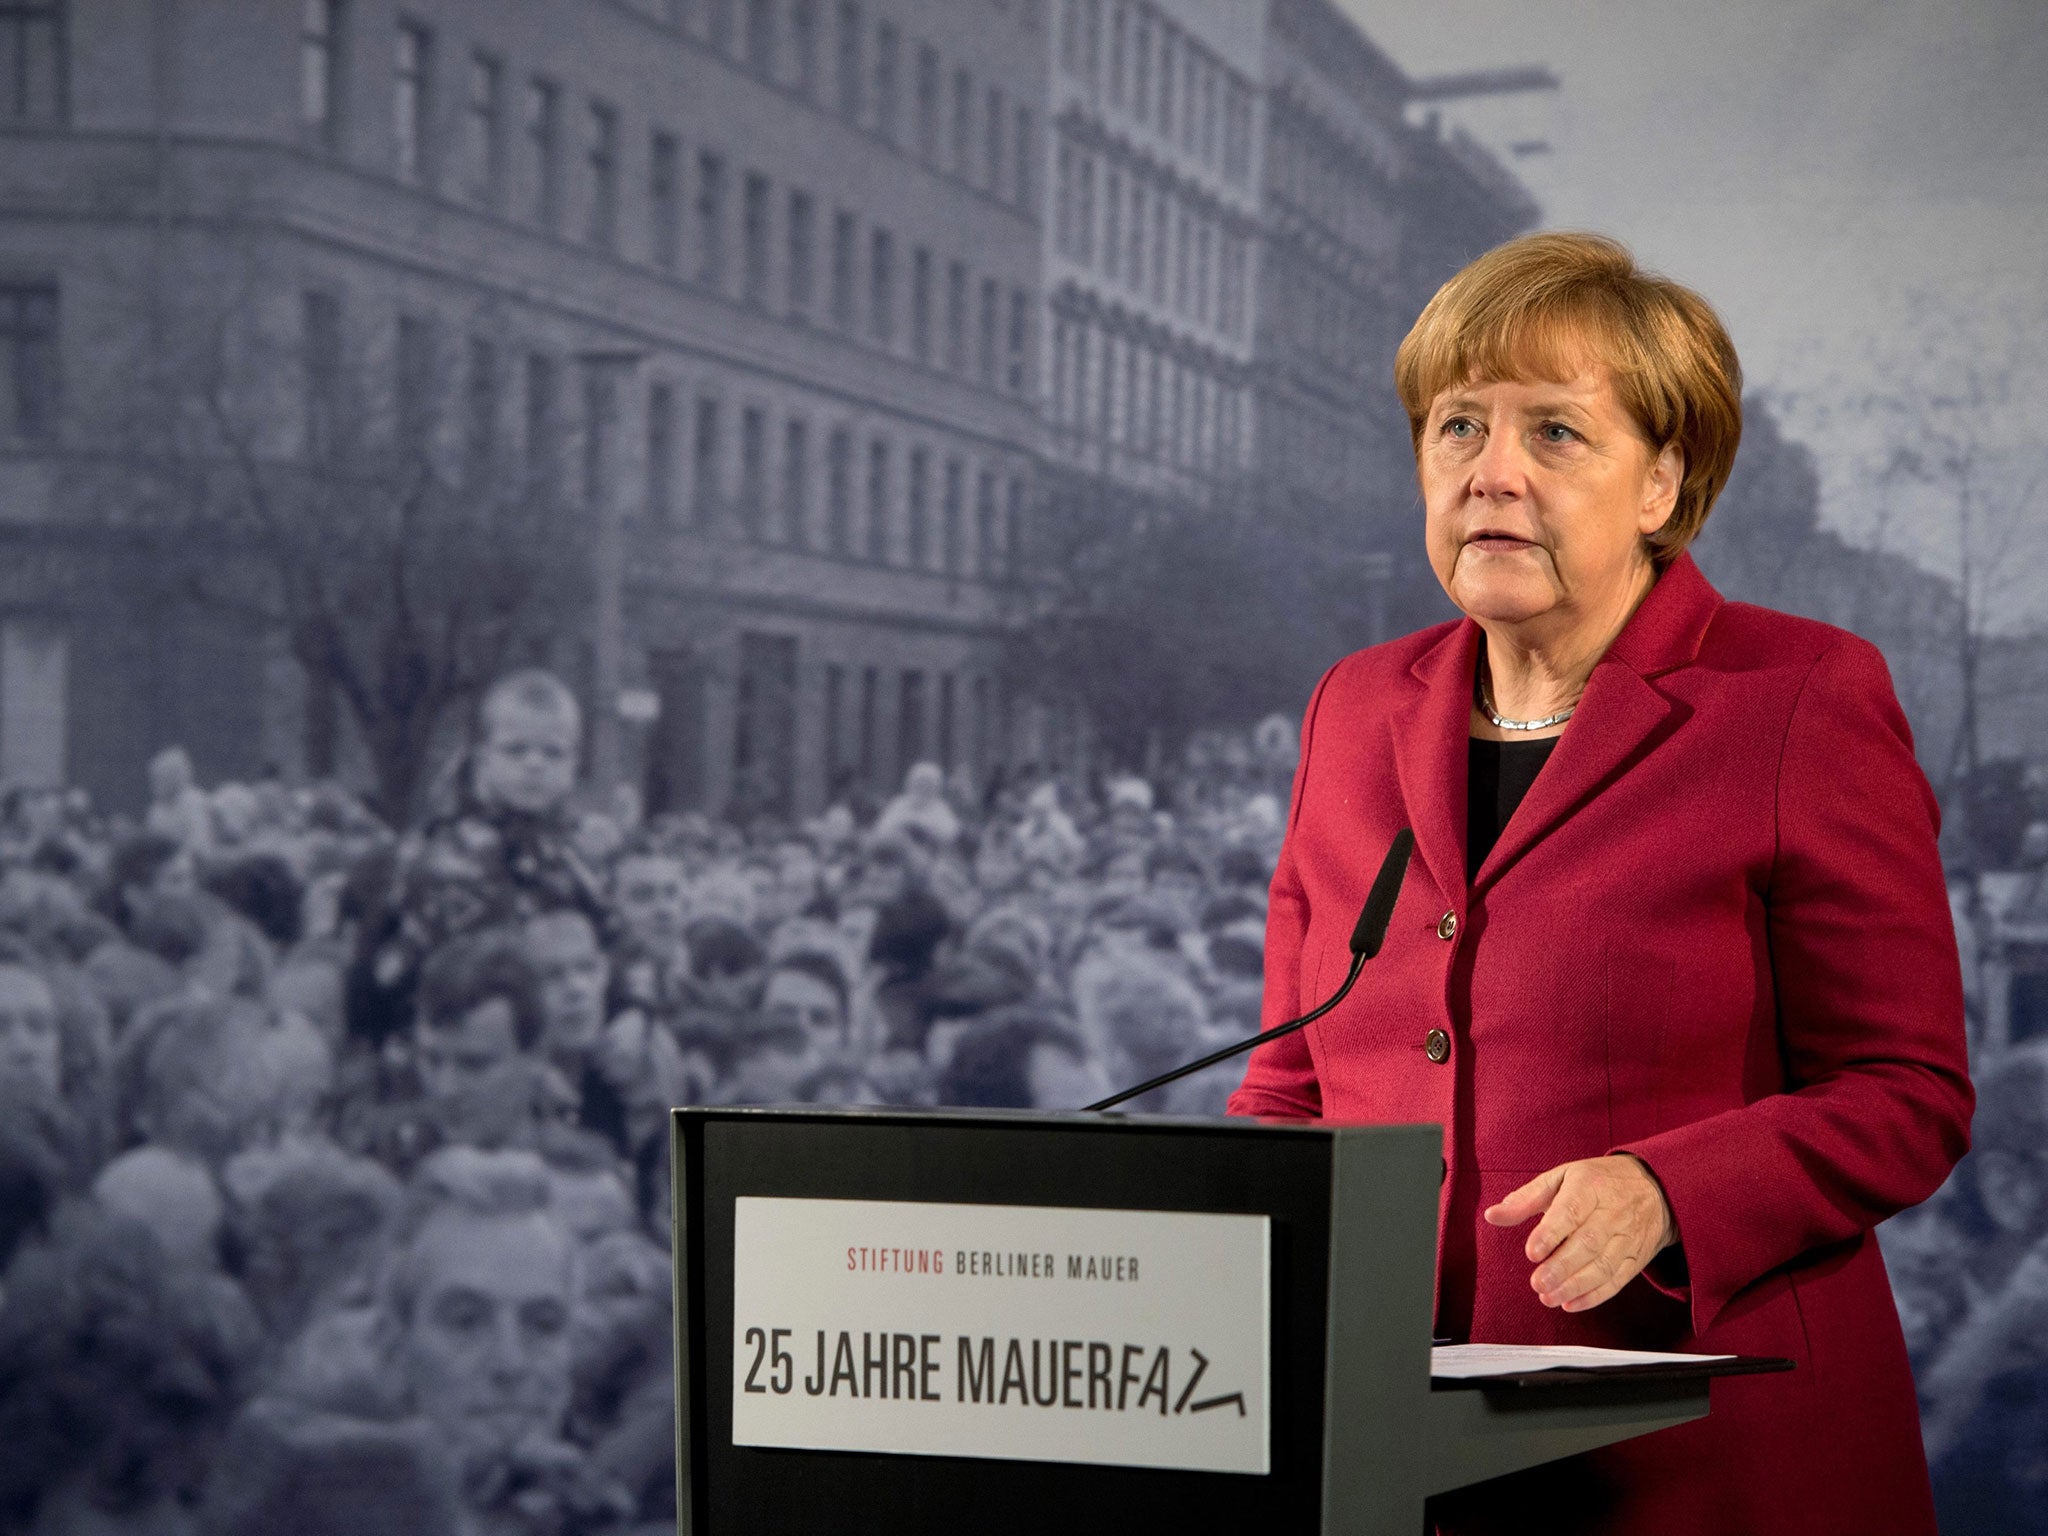 German Chancellor Angela Merkel speaks during the central commemorative event at the Berlin Wall Memorial Bernauer Strasse on 9 November 2014